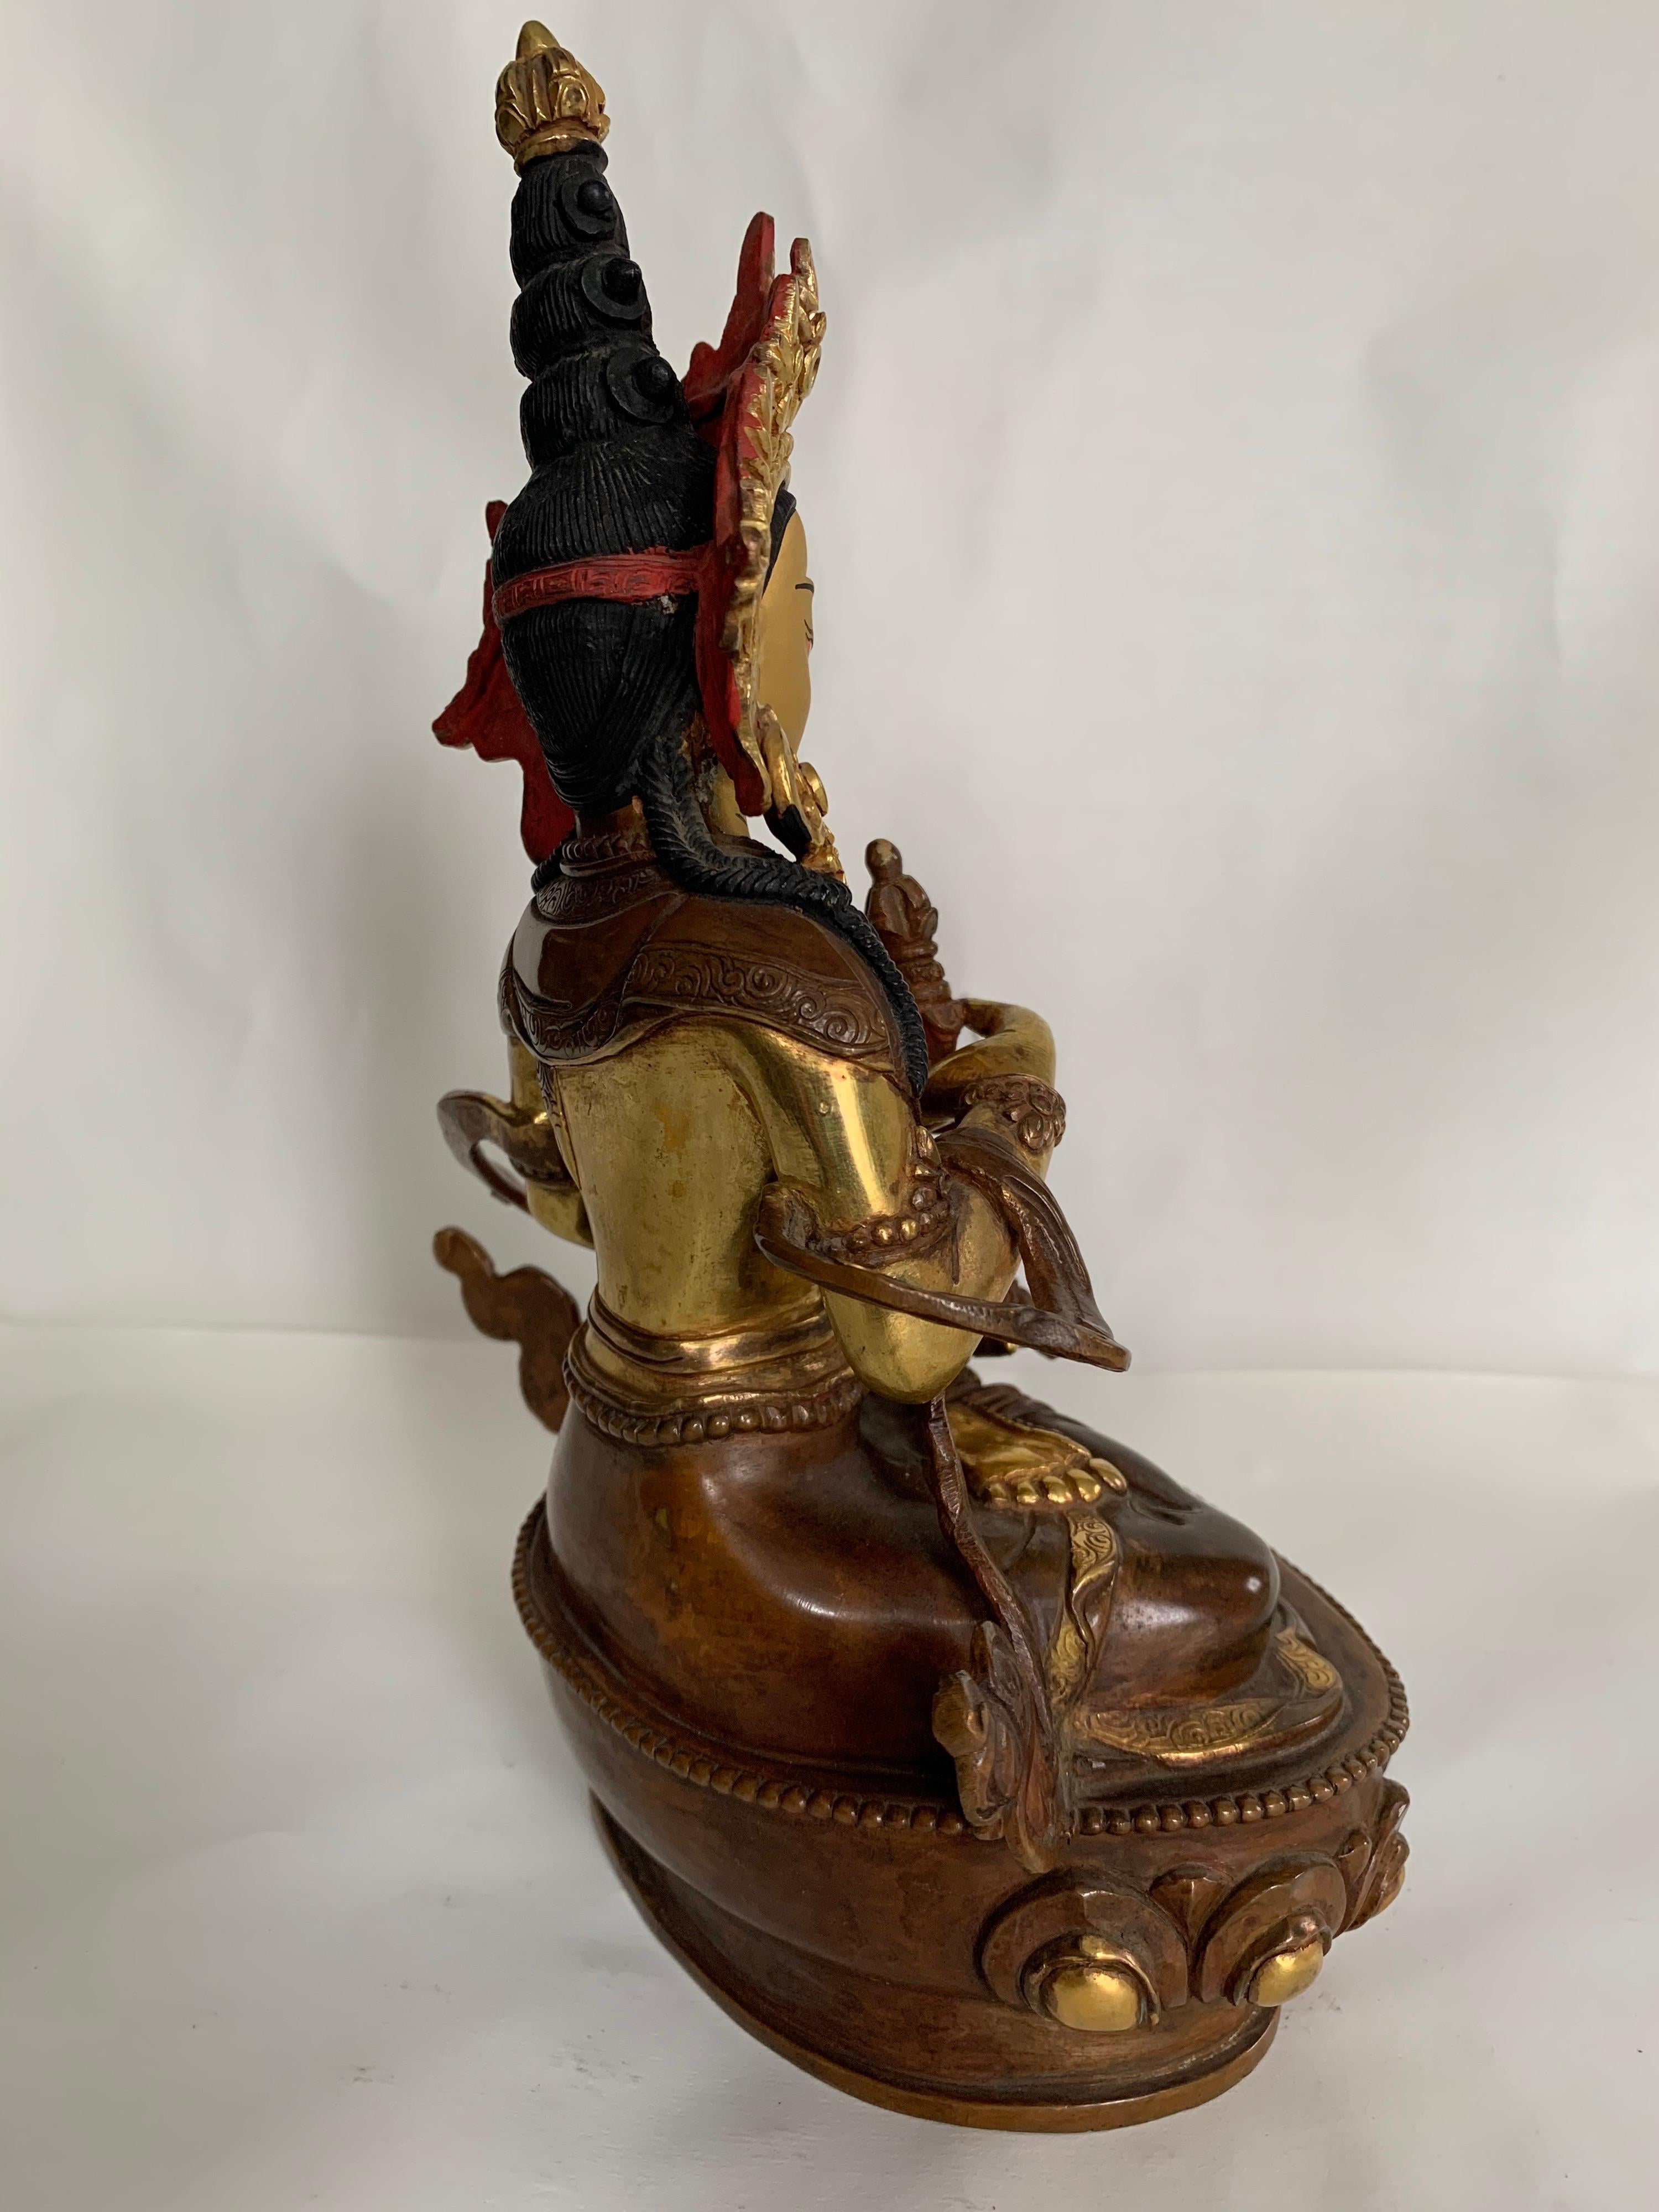 Vajrasattva Statue 9 Inch with 24K Gold Handcrafted by Lost Wax Process - Other Art Style Sculpture by Unknown